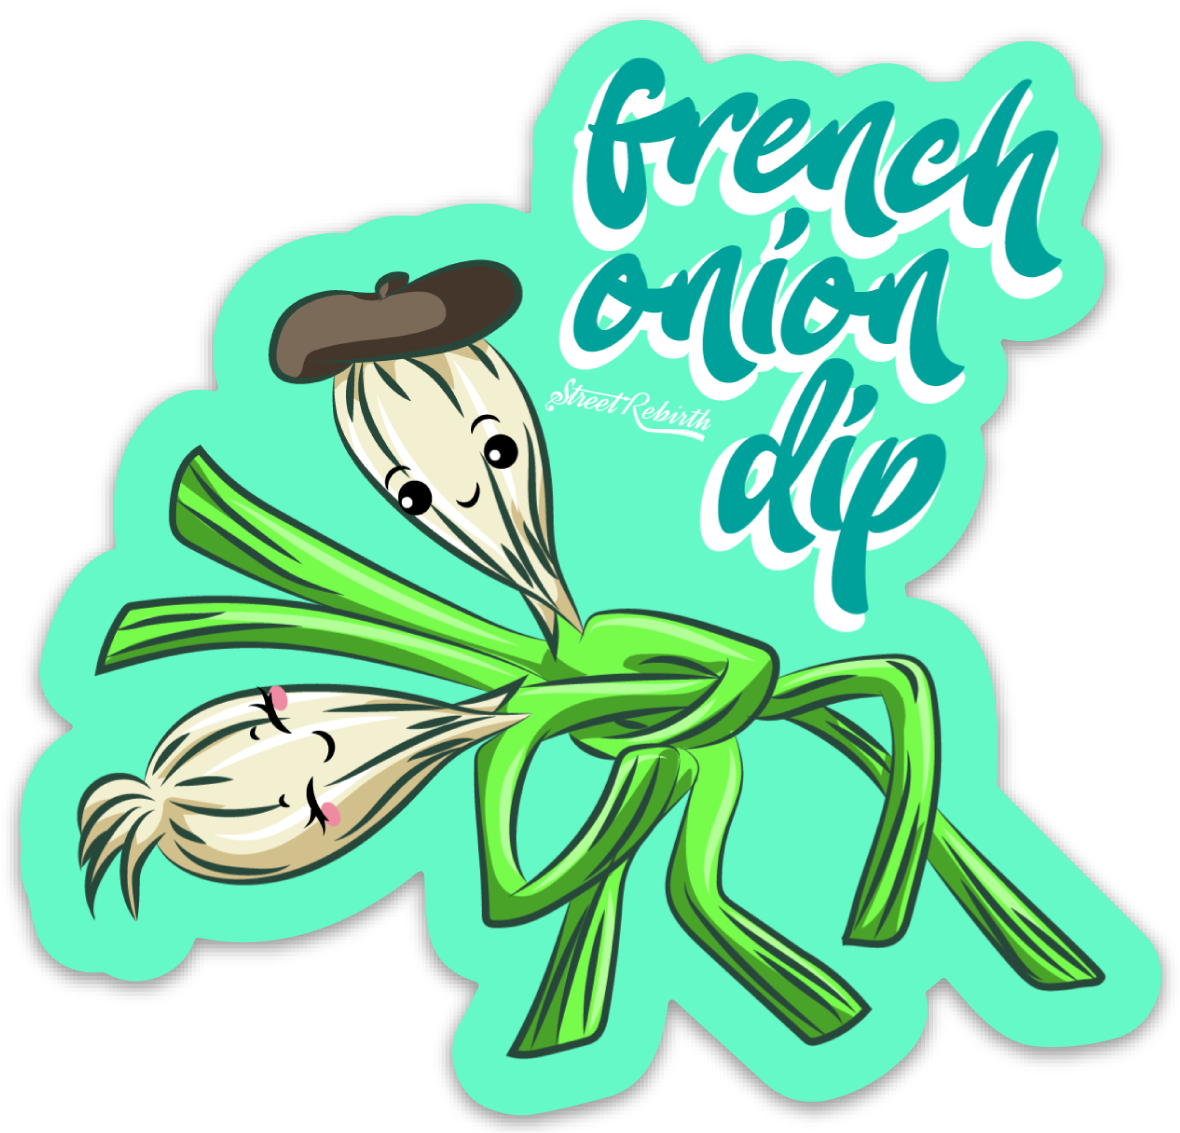 Grench Onion Dip PUN STICKER – ONE 4 INCH WATER PROOF VINYL STICKER – FOR HYDRO FLASK, SKATEBOARD, LAPTOP, PLANNER, CAR, COLLECTING, GIFTING